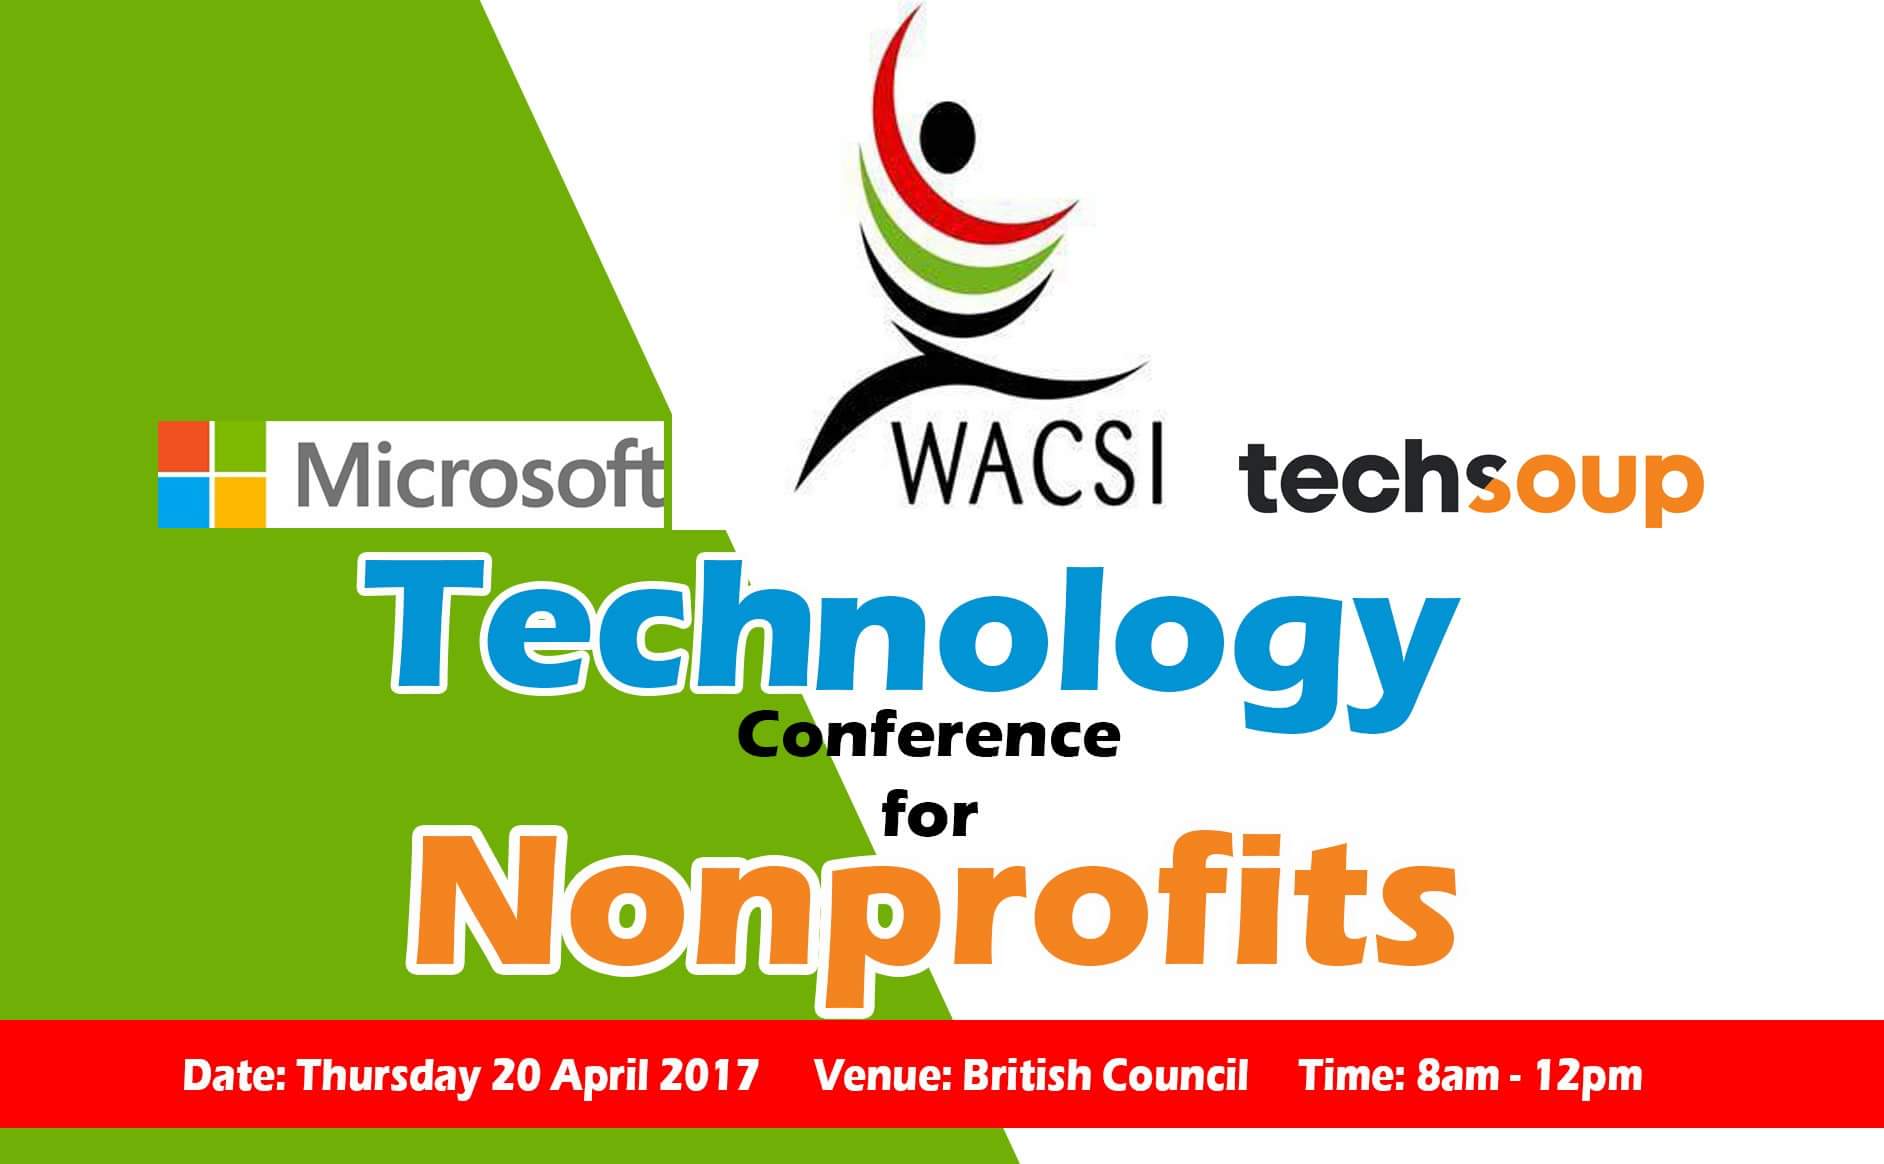 Microsoft, WACSI, Techsoup host Technology Conference for Nonprofits